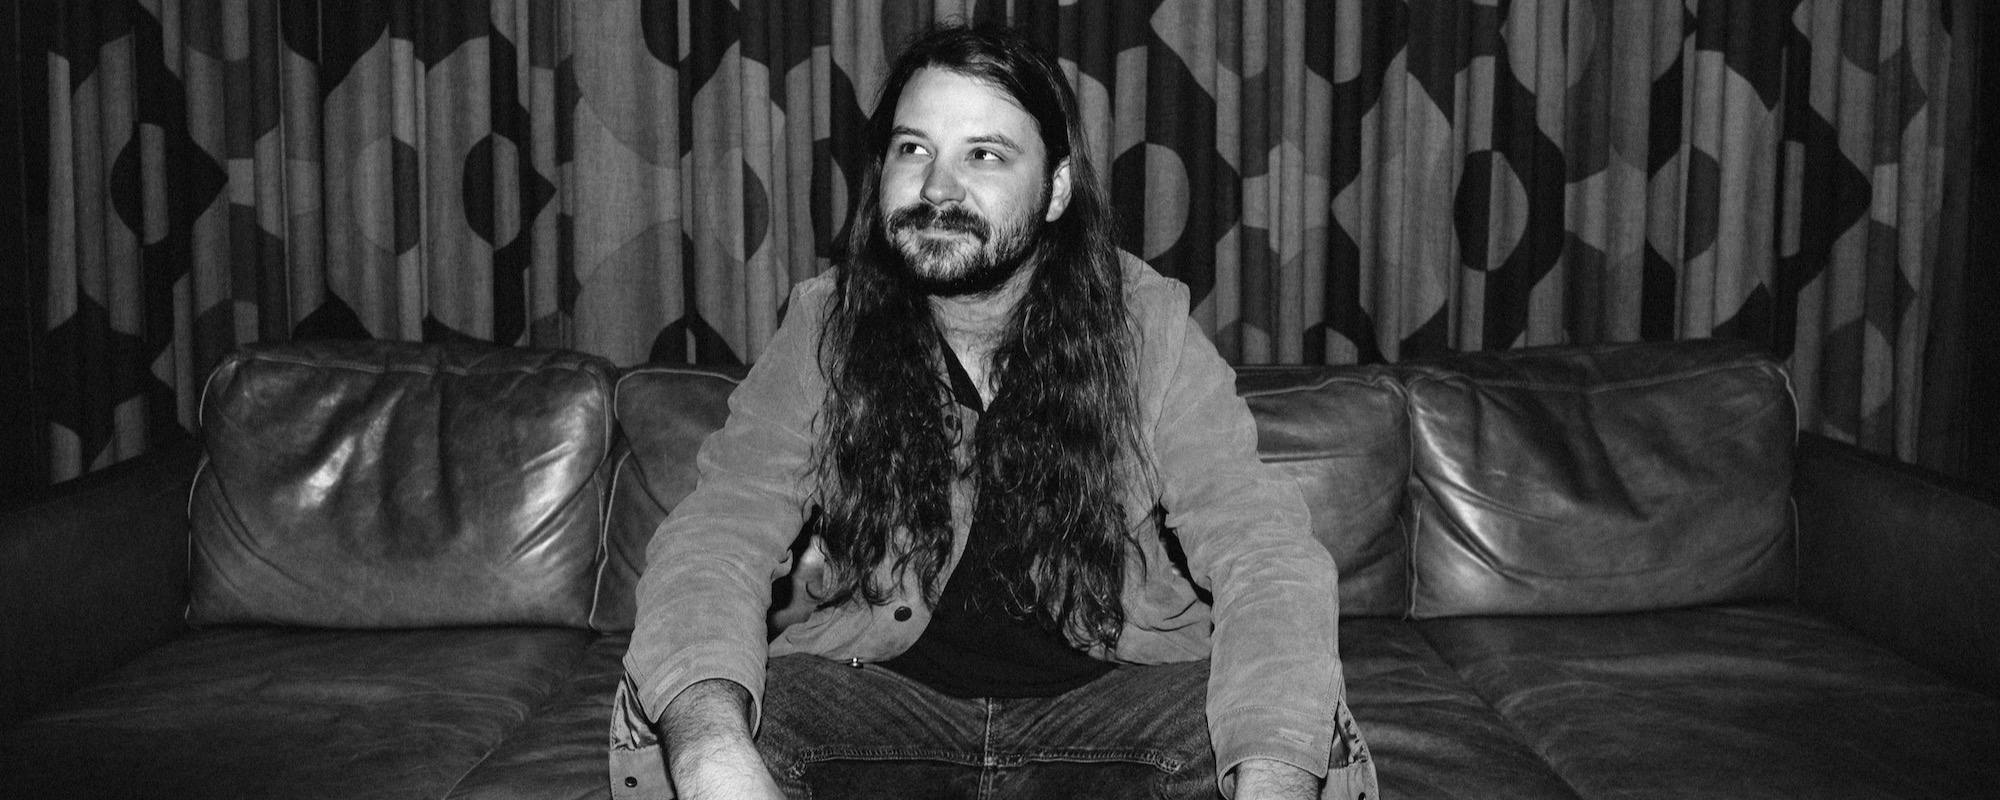 Brent Cobb Announces New Album ‘Southern Star’, Shares Title Track